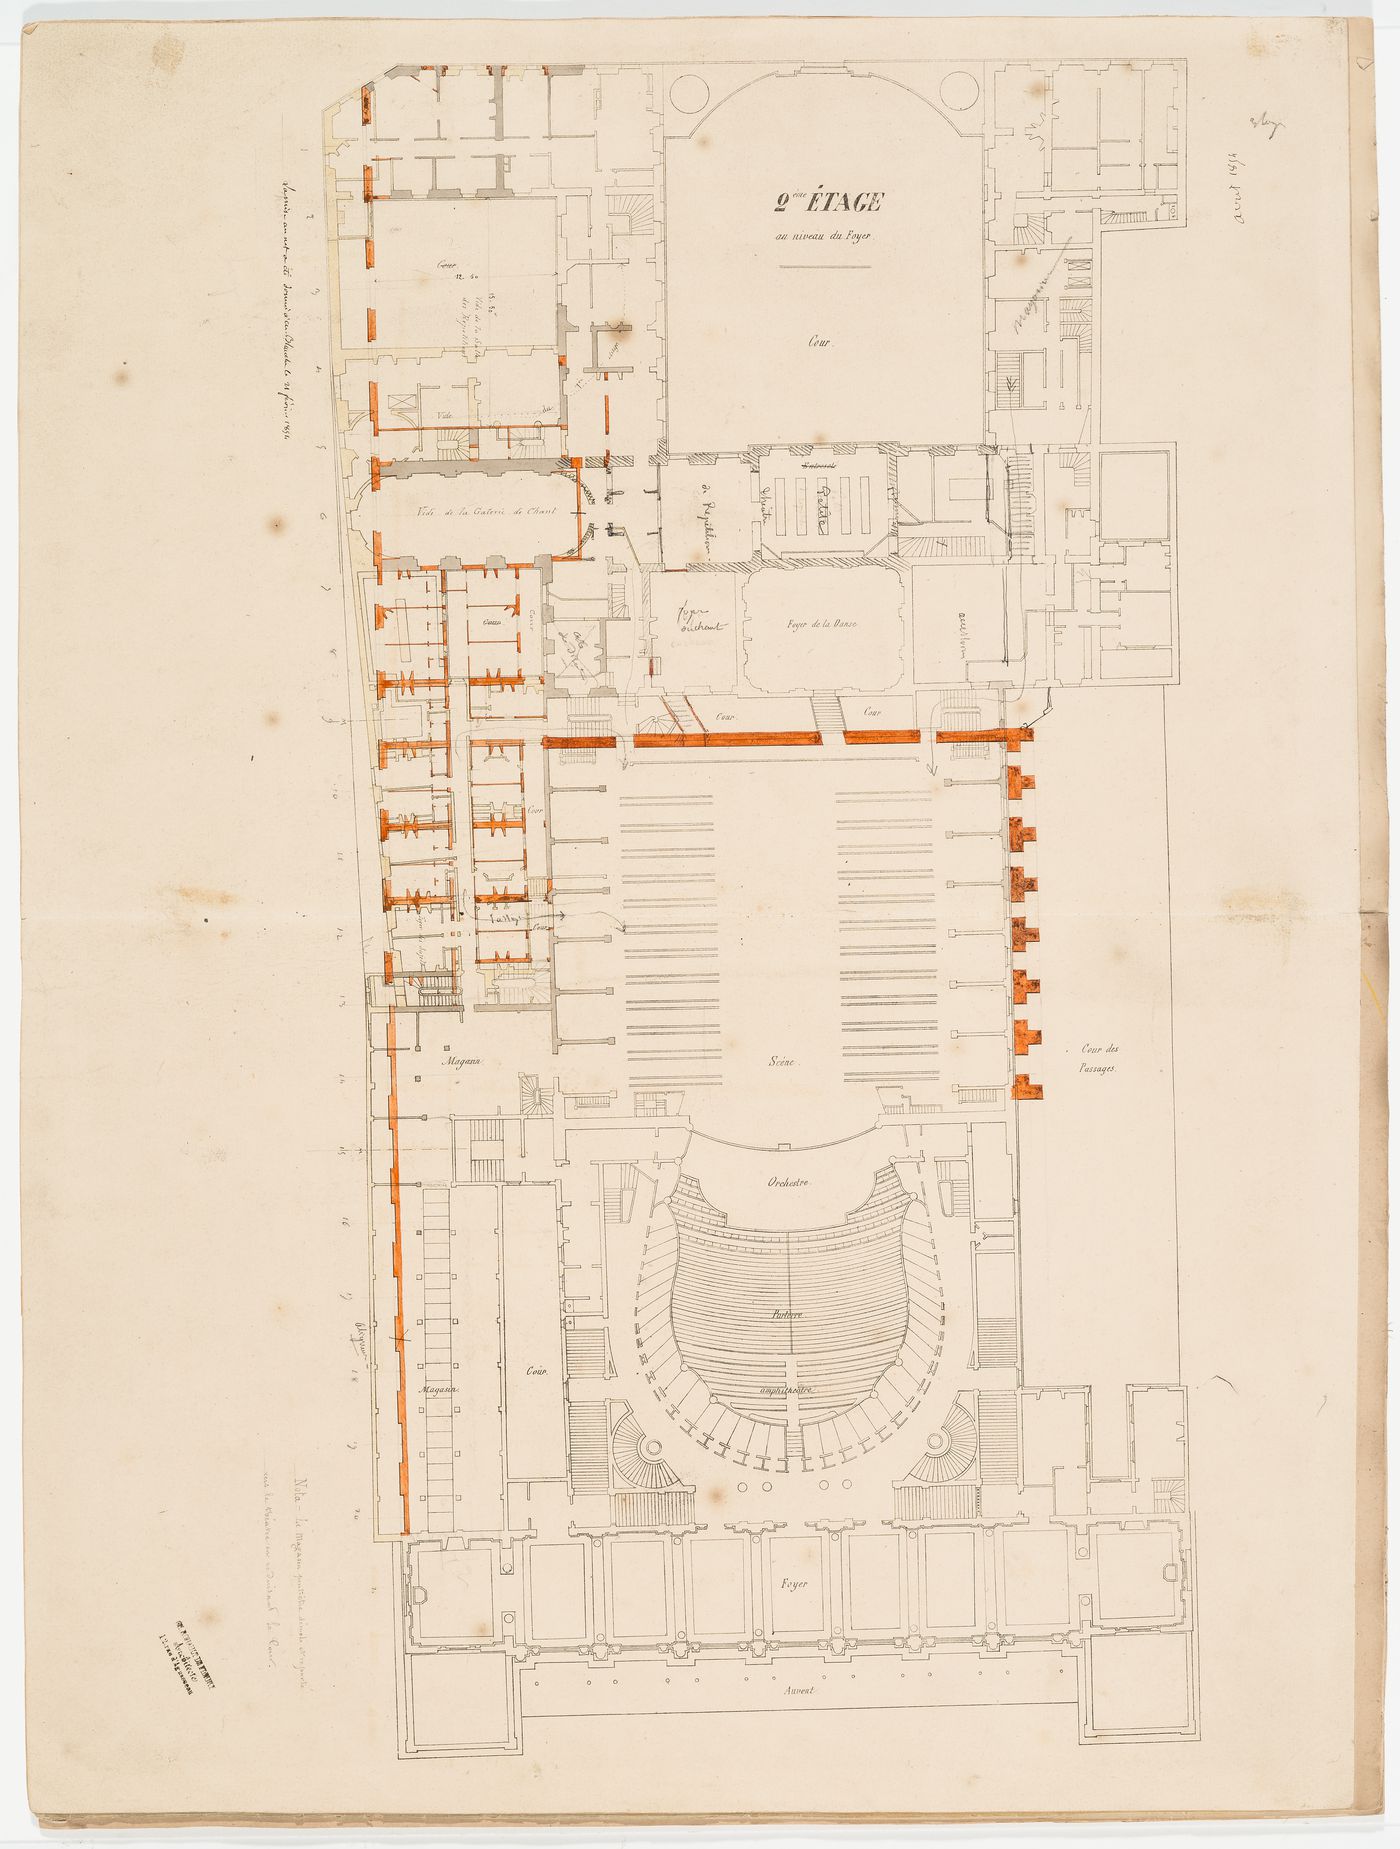 Plan of the second floor "au niveau du foyer" with additions for alterations, Salle Le Peletier